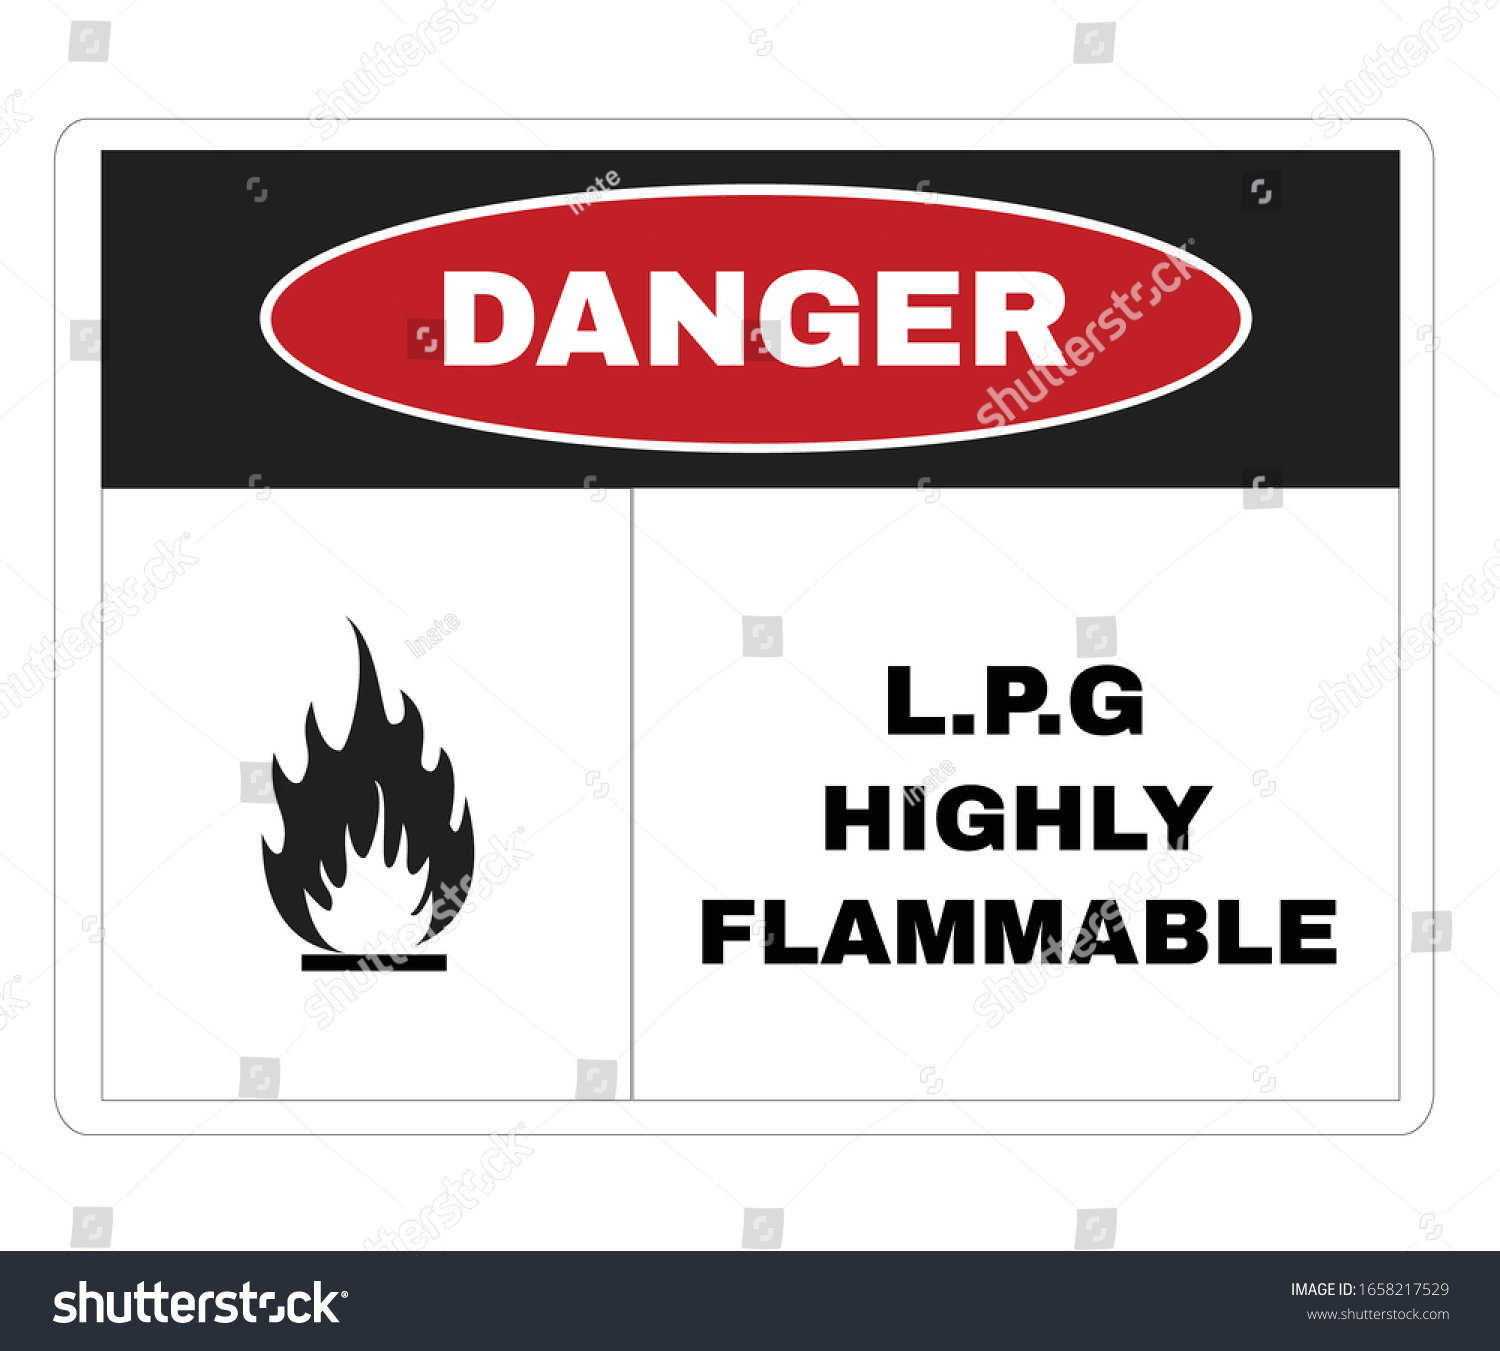 2 X DANGER HIGHLY FLAMMABLE LPG STICKERS SIGNS 